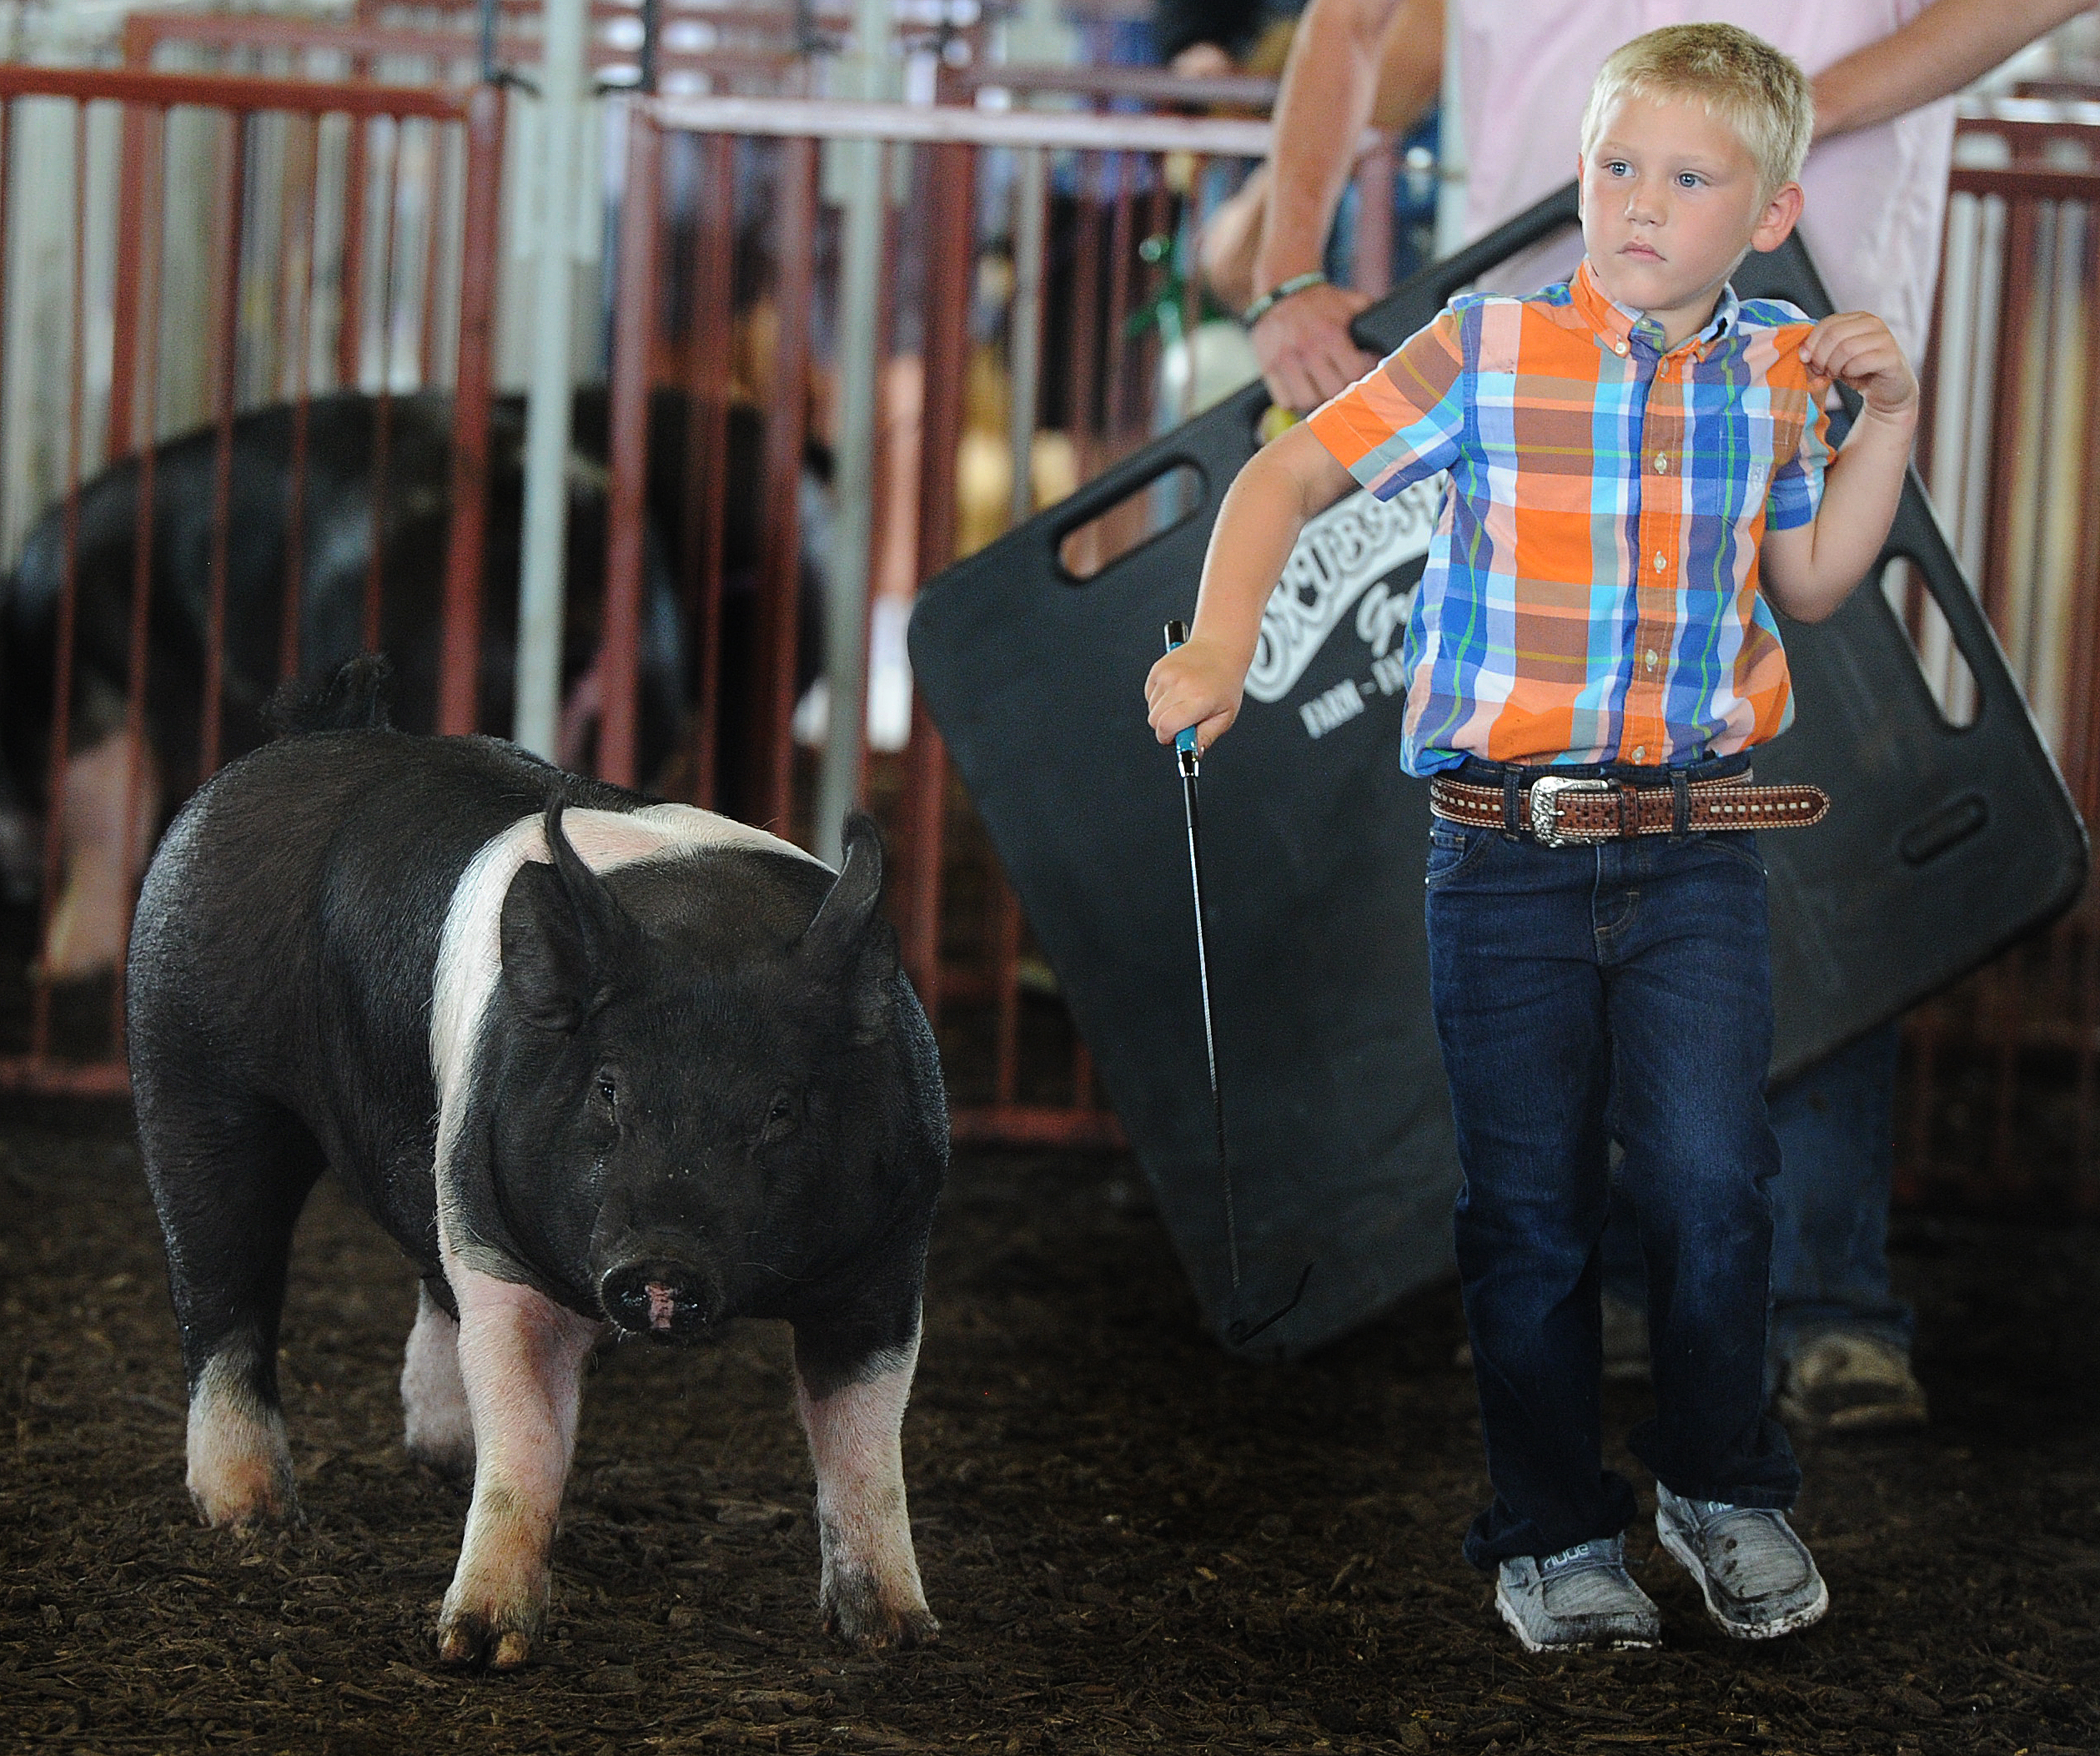 Kooper Tilton, 6, keeps his eyes on the judge during the middle weight Barrow class Wednesday, July 14, 2021 at the Montgomery County Fair.  MARSHALL GORBYSTAFF